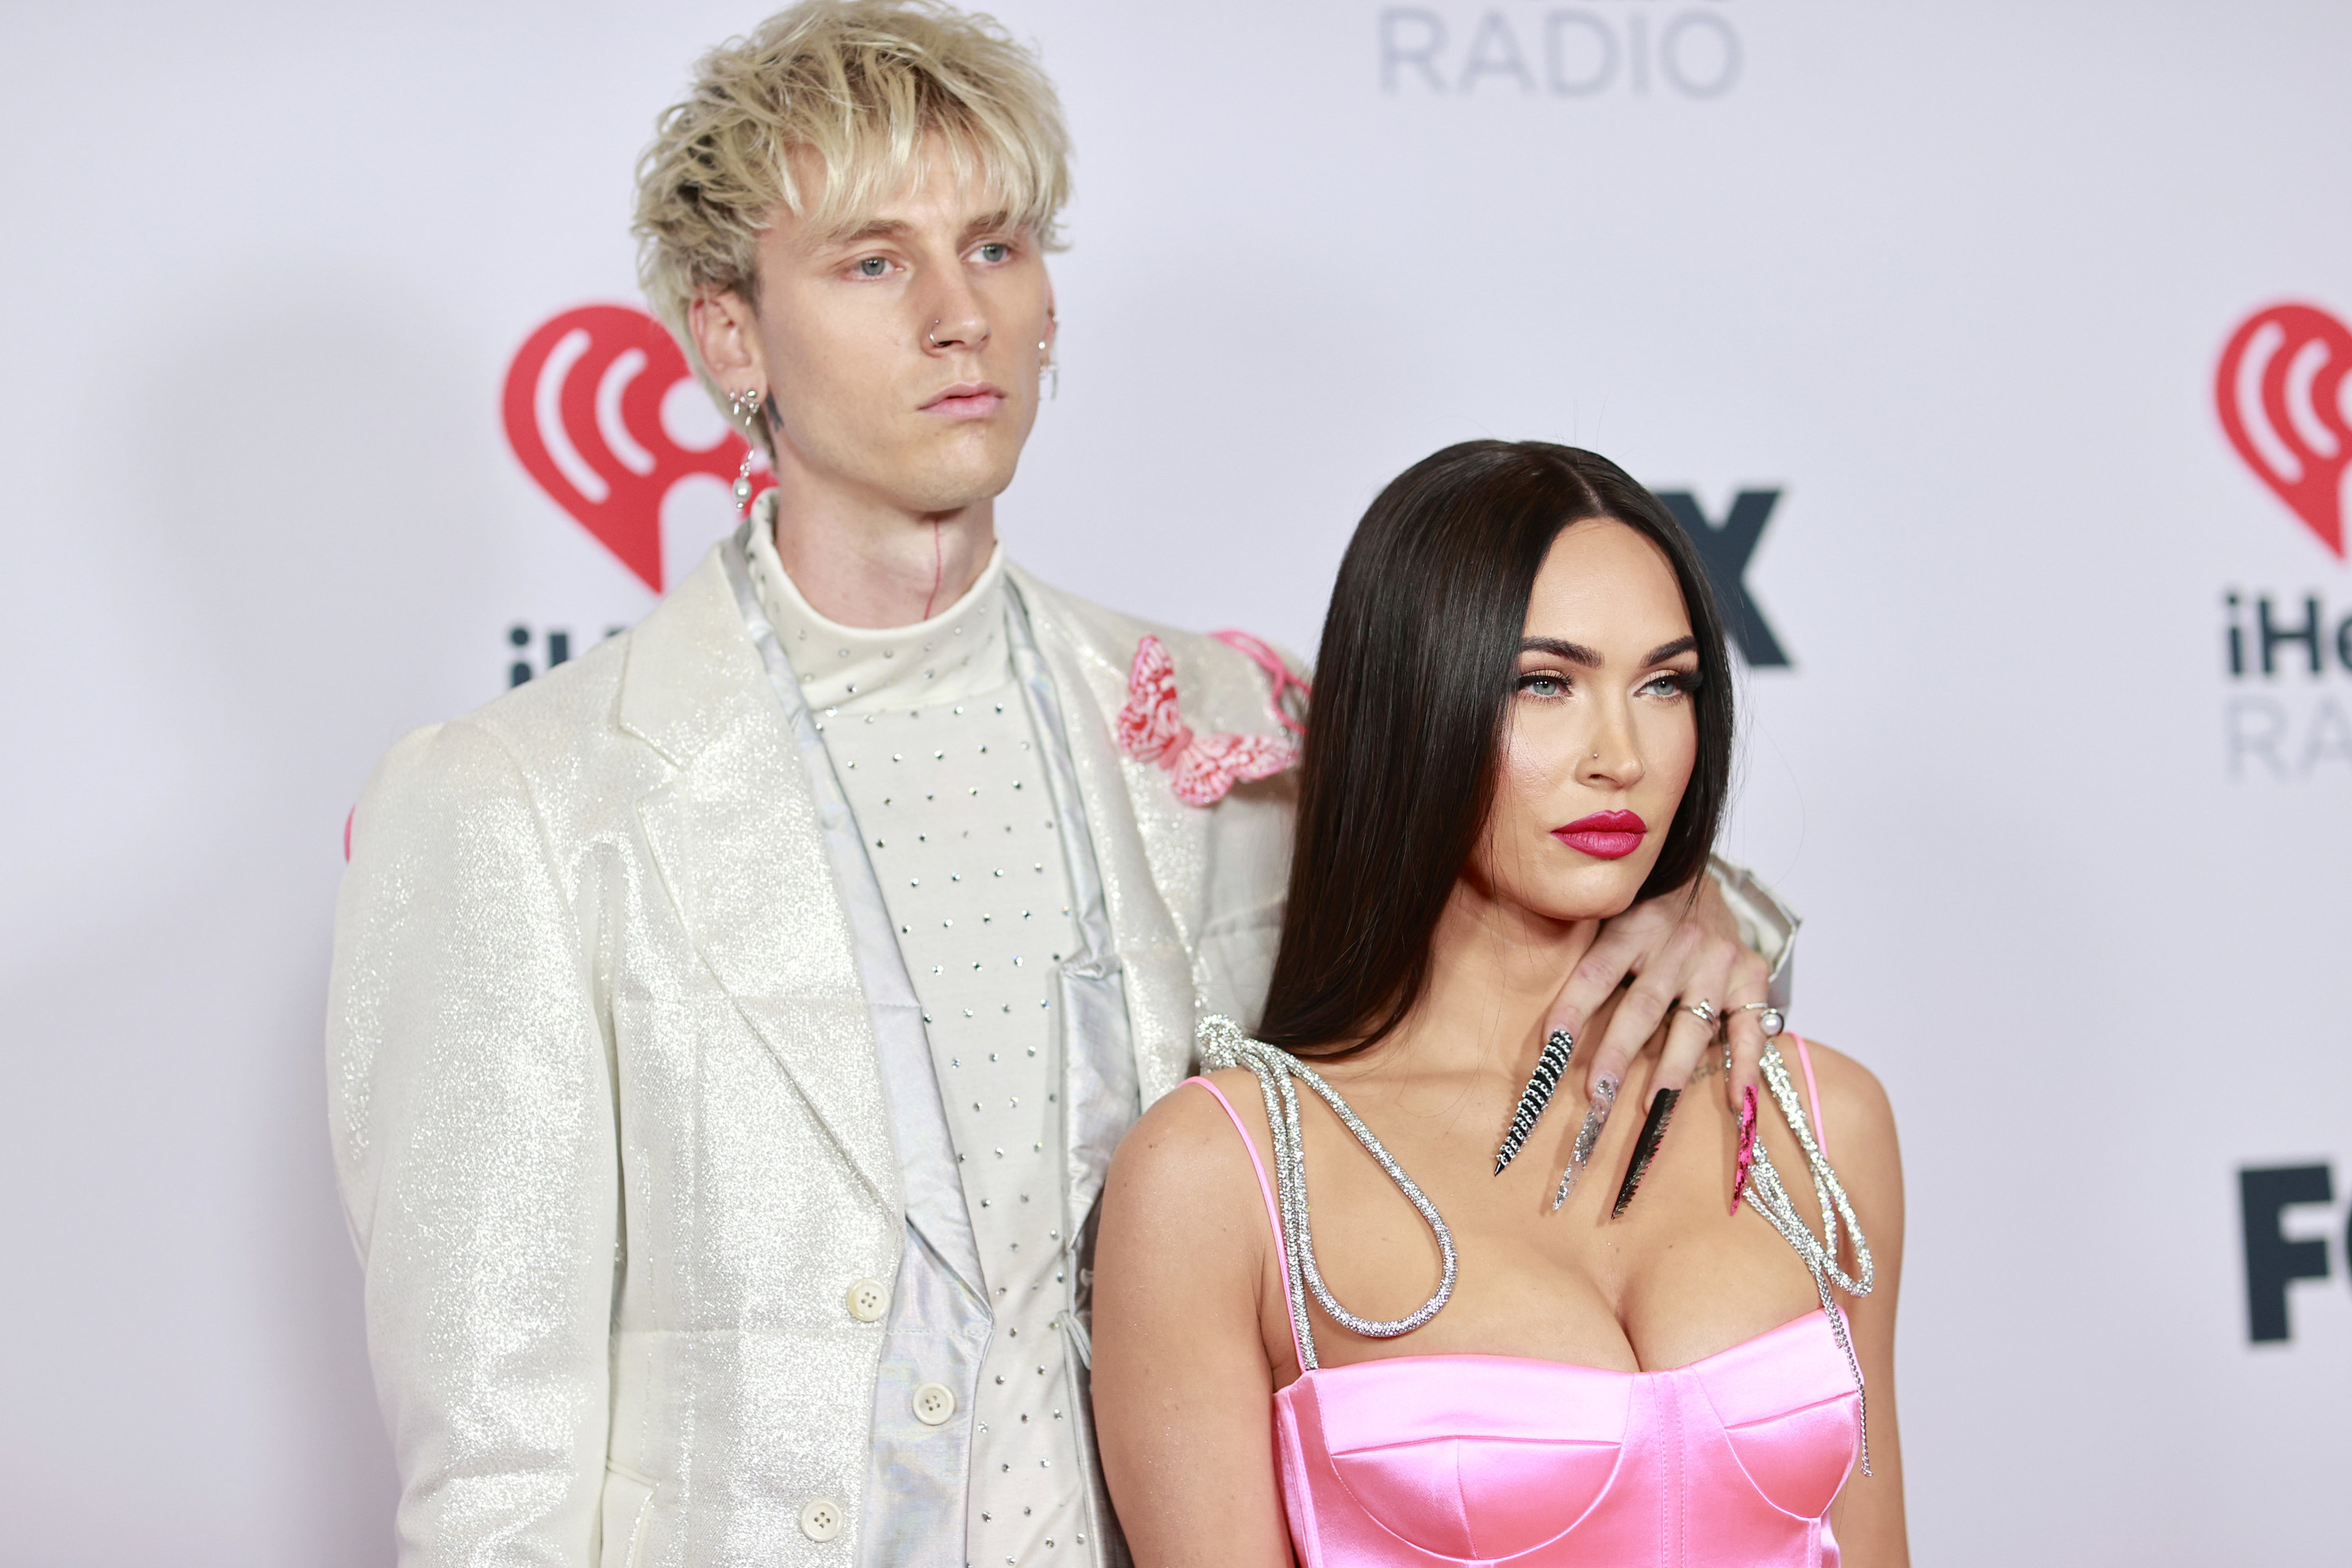 Machine Gun Kelly and Megan Fox stand next to each other at an event